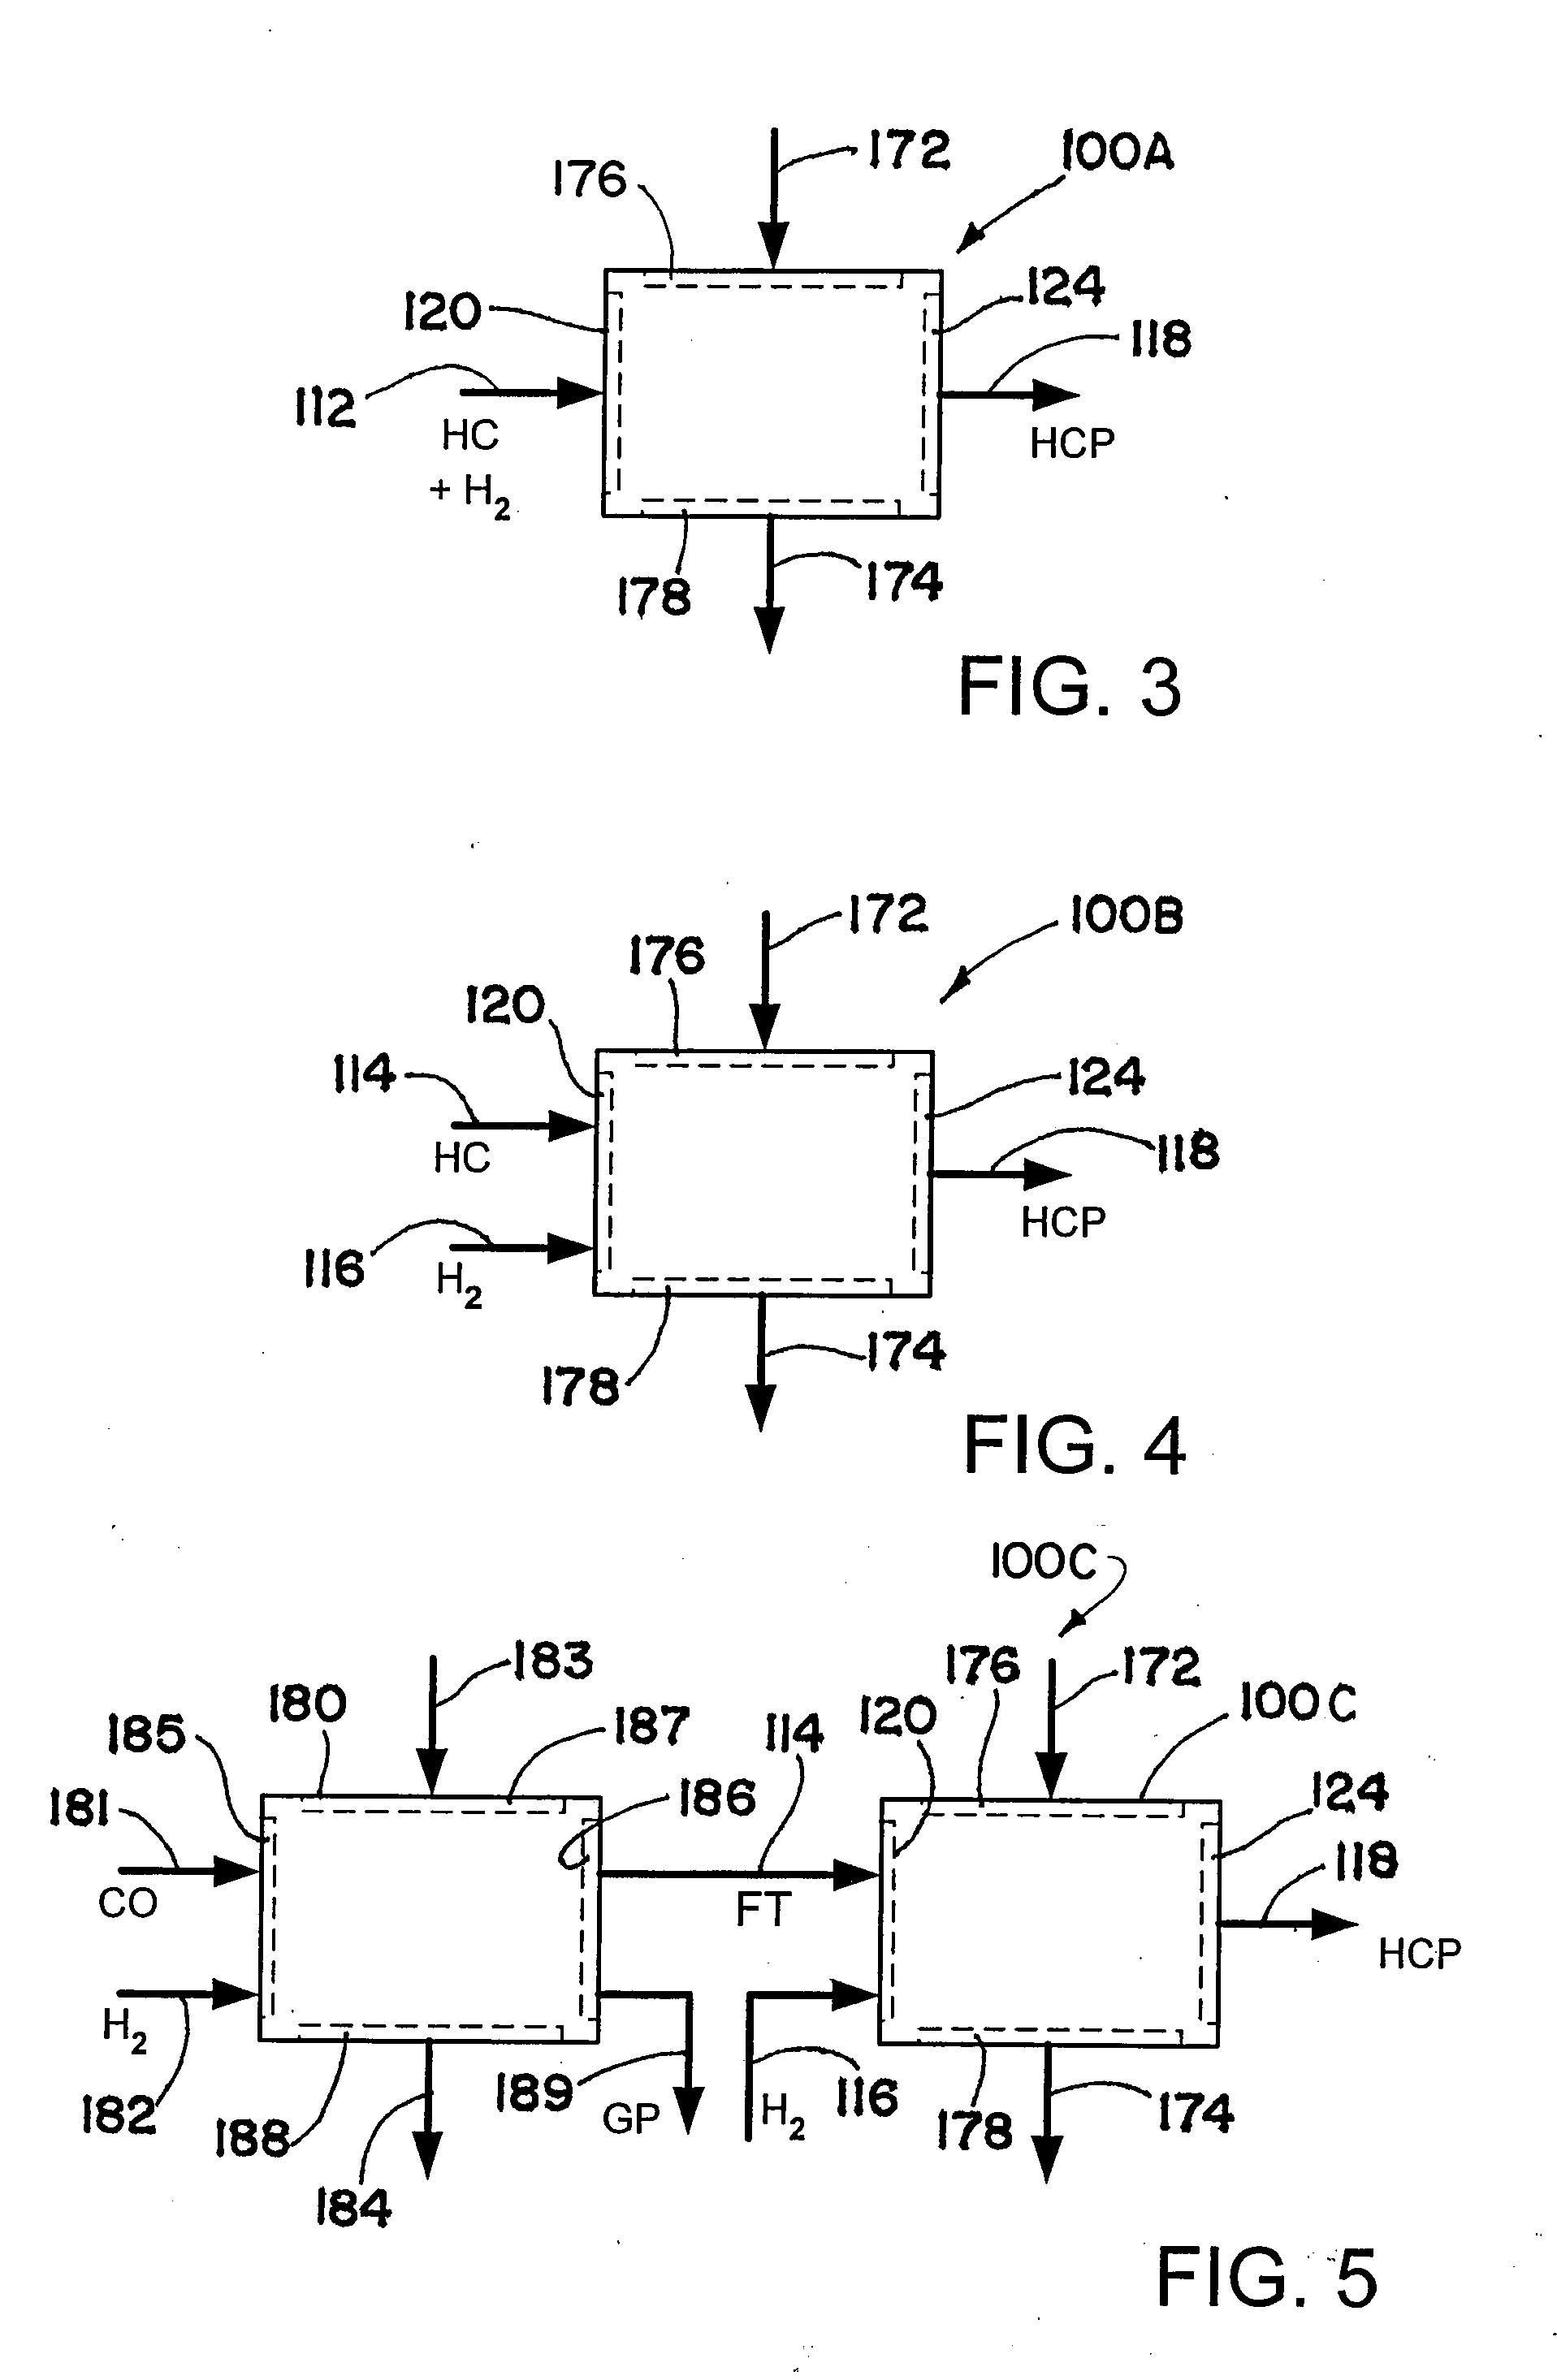 Process and apparatus employing microchannel process technology